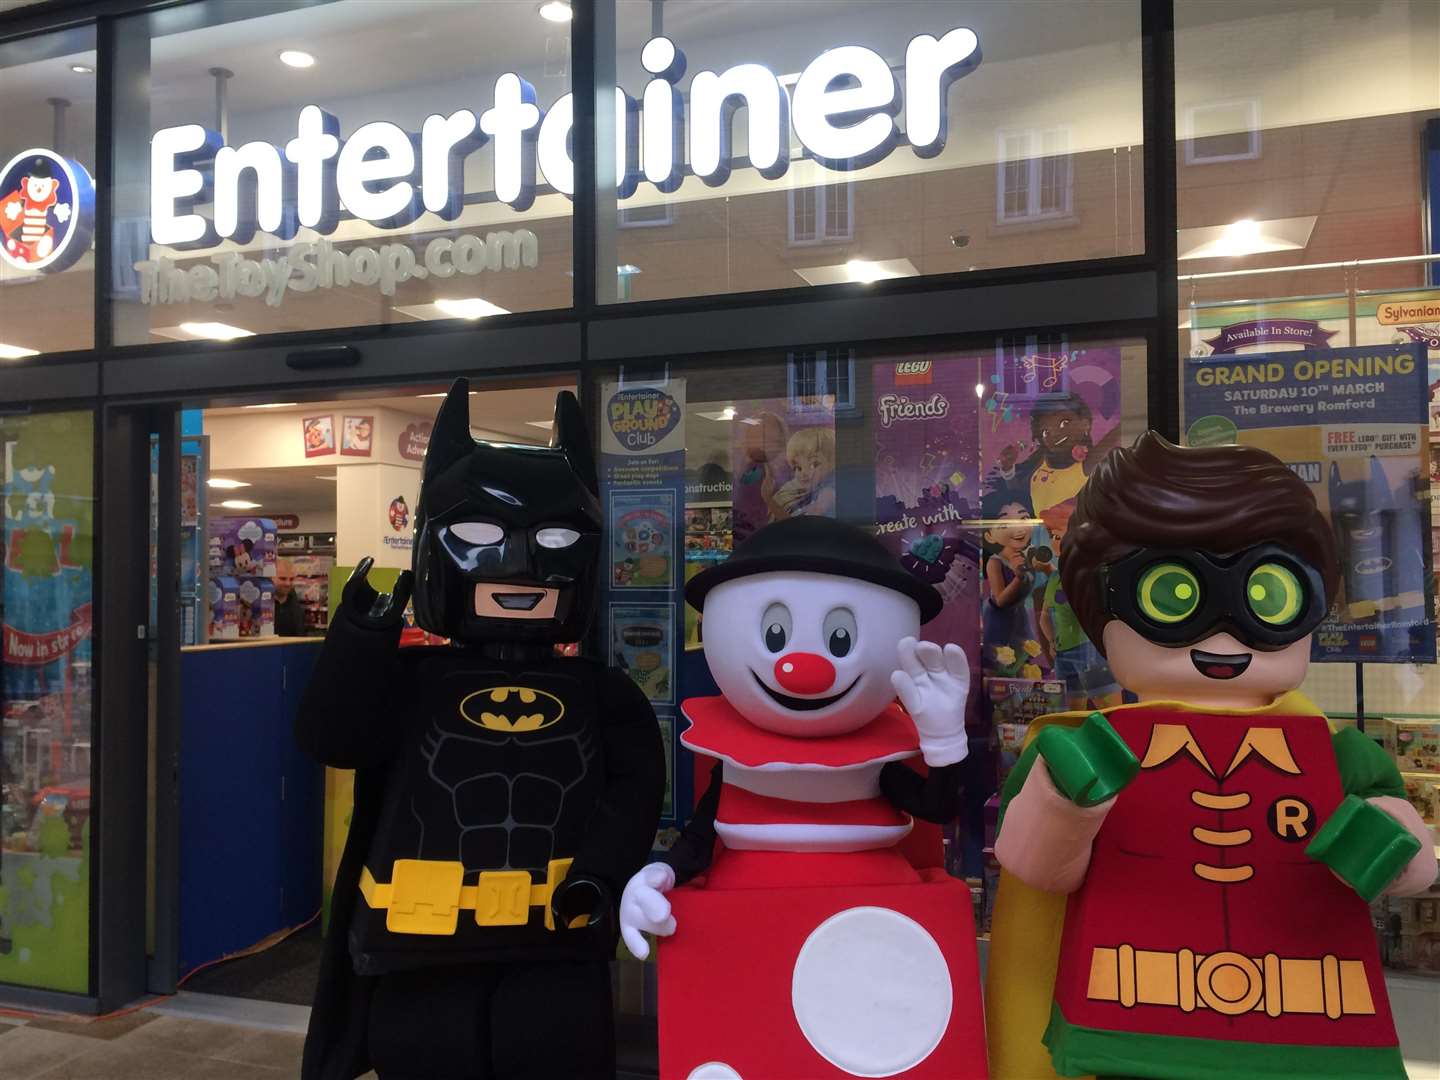 Batman and Robin with The Entertainer's own character Jack. Picture courtesy of The Entertainer